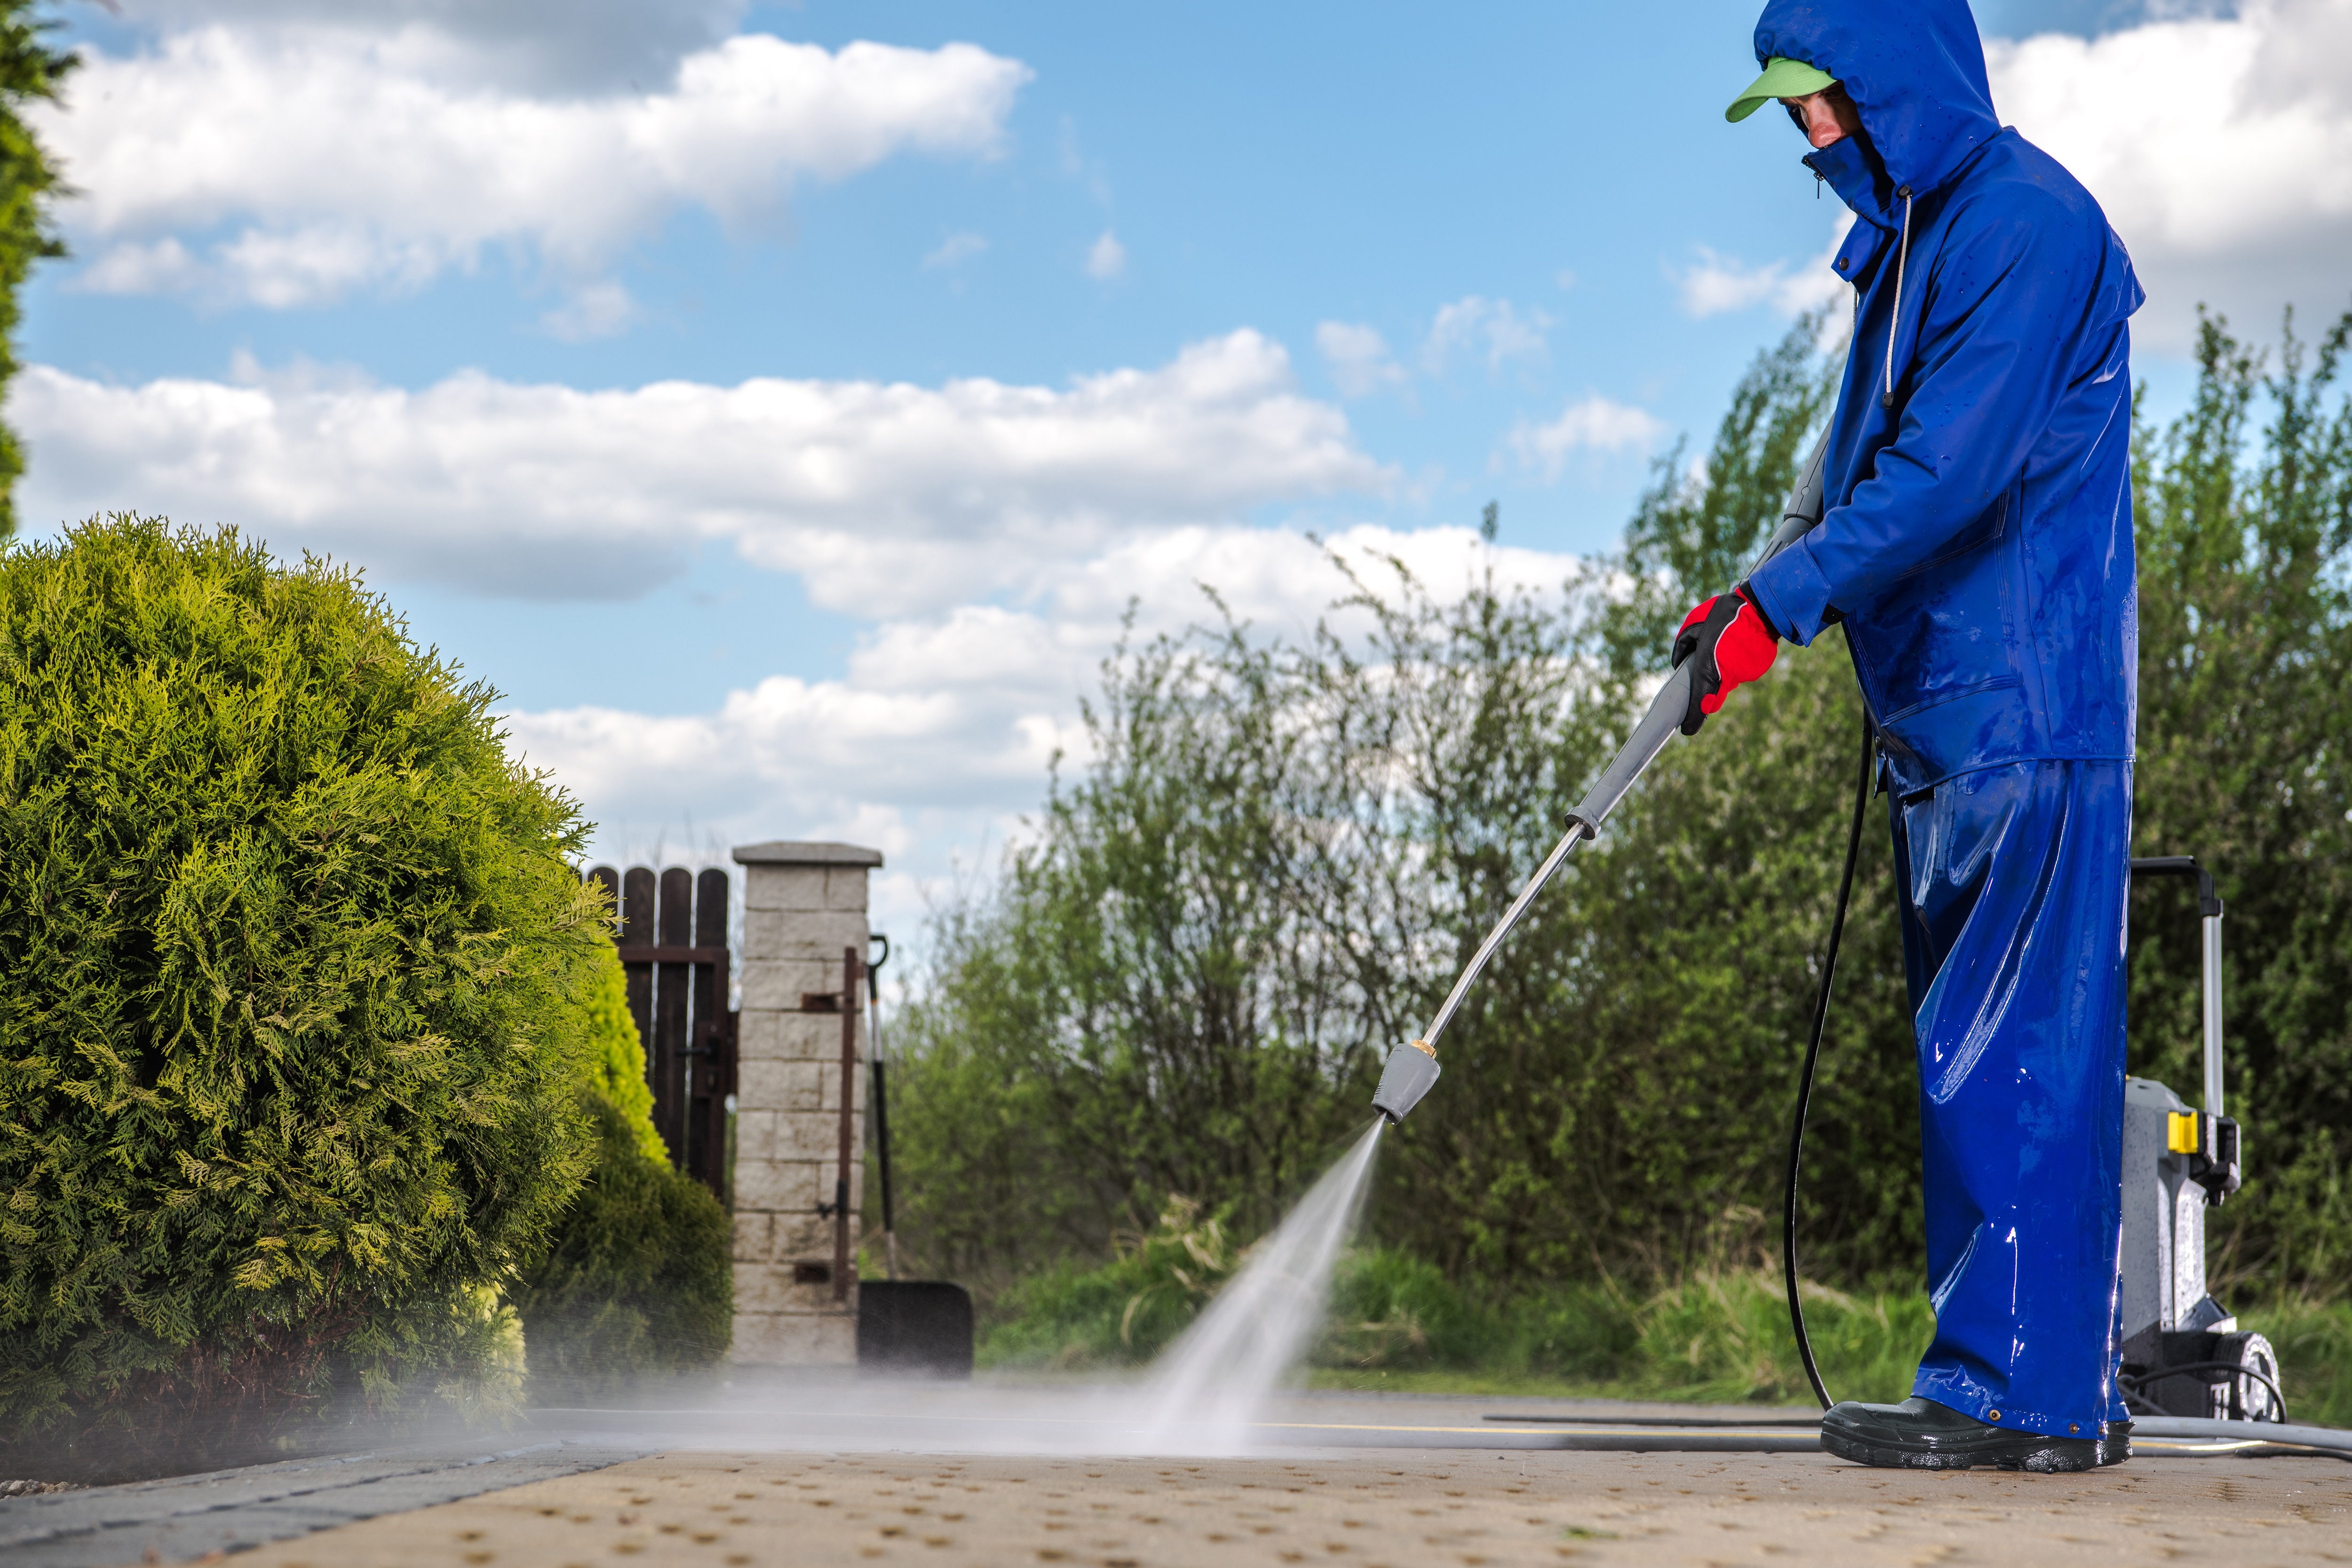 A person in a blue rain suit power washing a driveway, enhancing the home’s curb appeal.